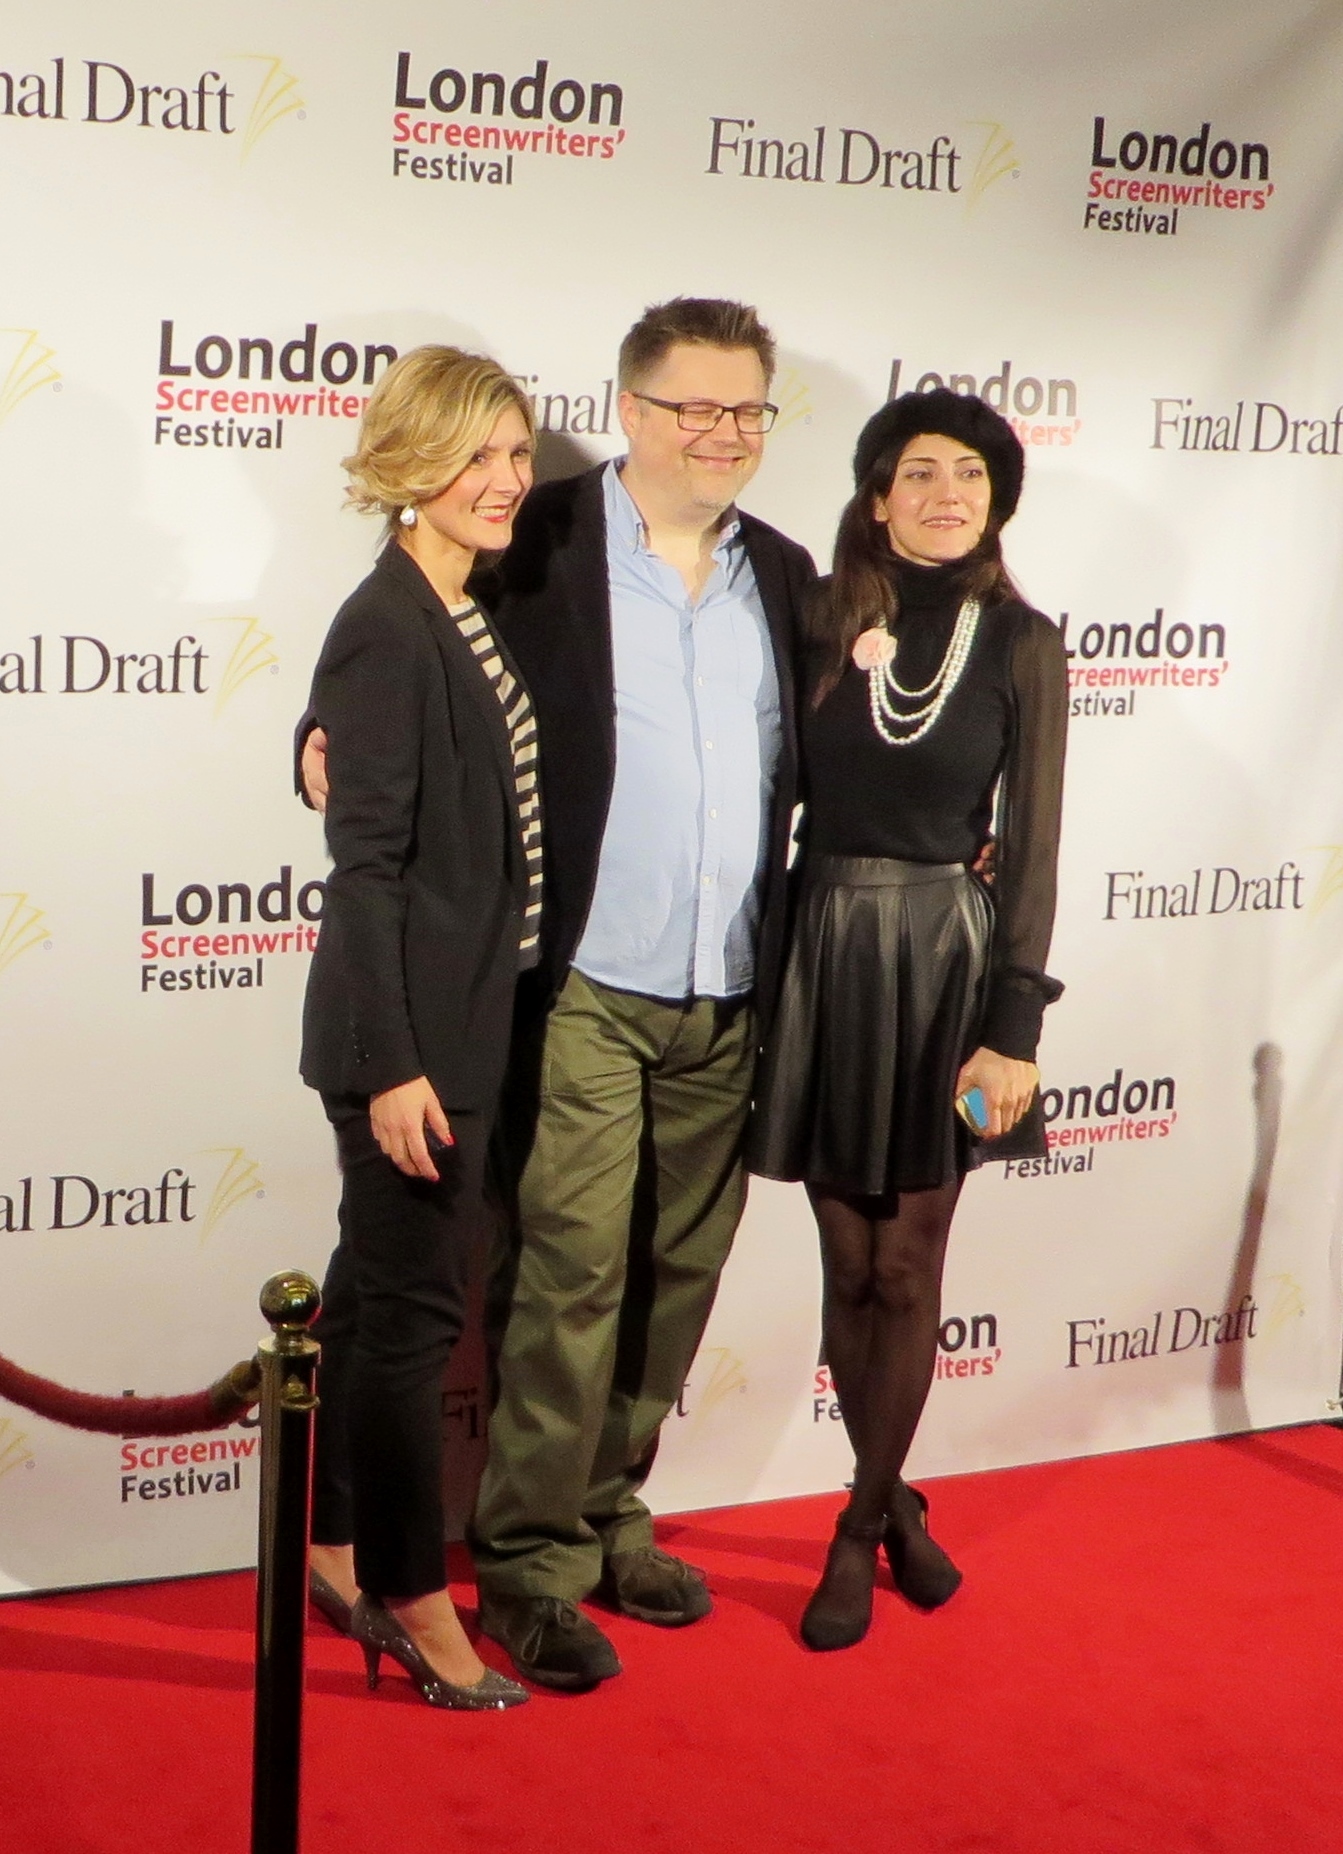 Red Carpet at Guinness Book of World Records Gala Screening at BAFTA's 195 Piccadilly, London with Chris Jones and Stare Yildirim April 2014